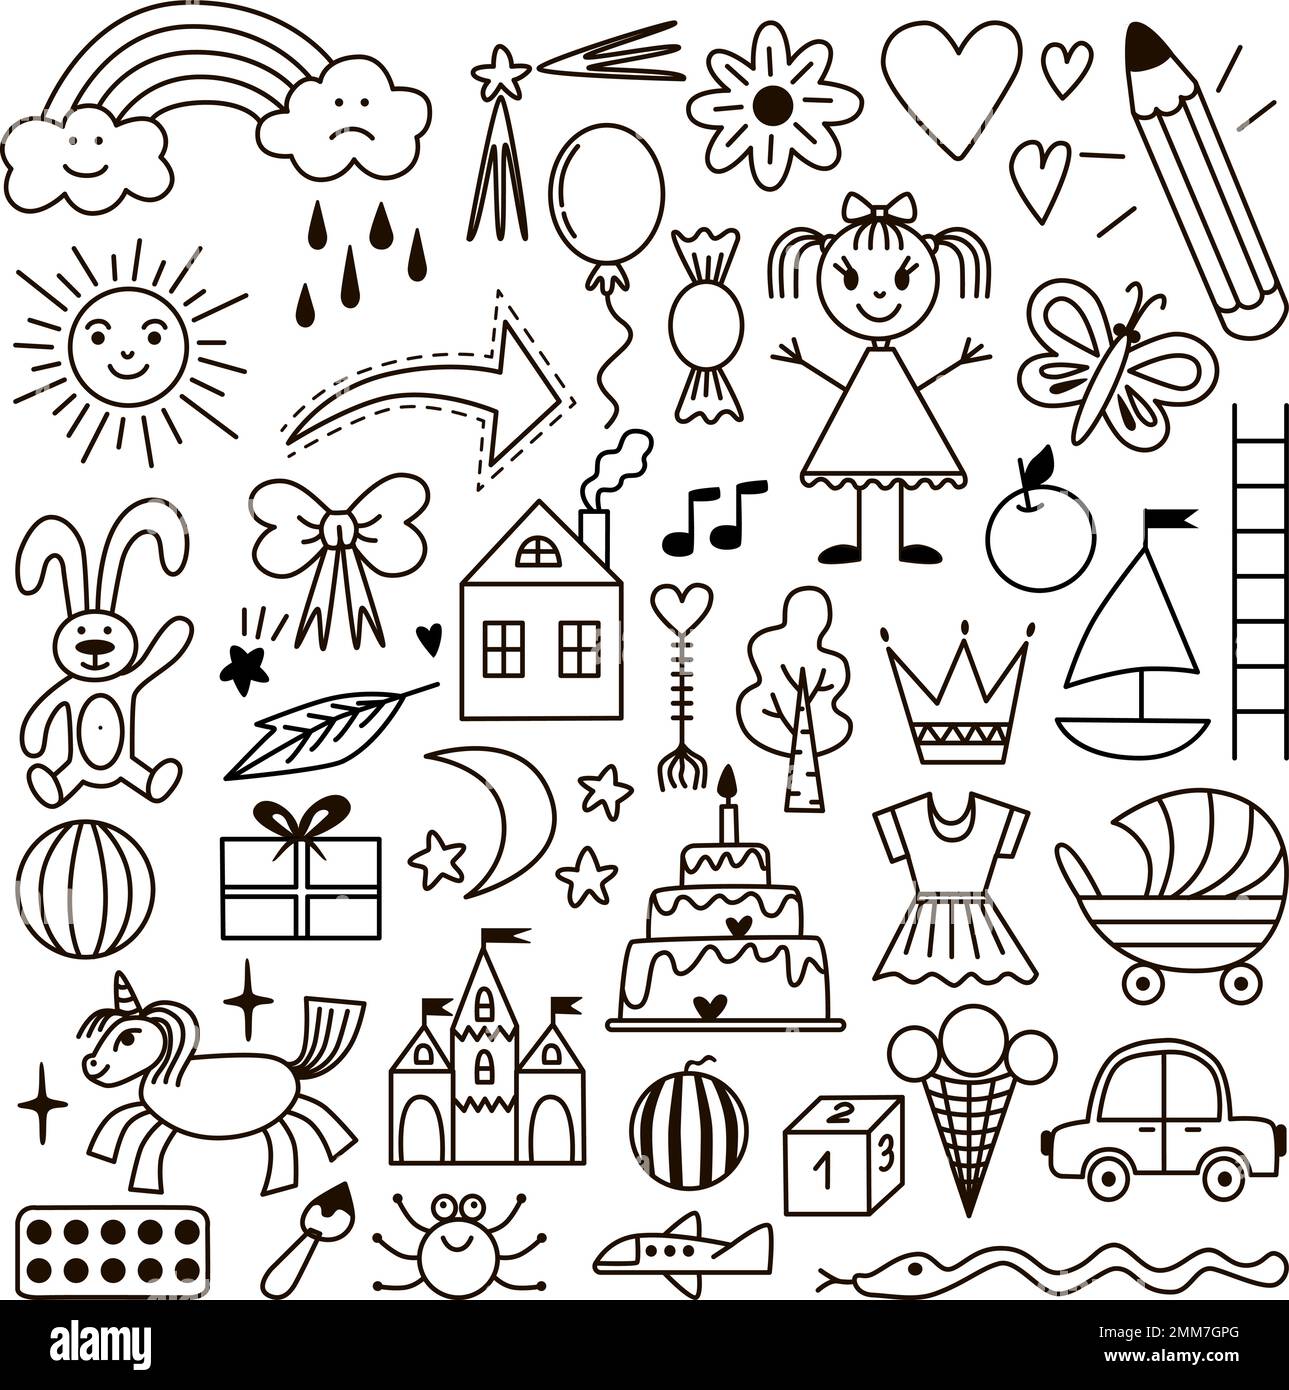 https://c8.alamy.com/comp/2MM7GPG/kid-doodle-icons-preschool-kids-graphic-outline-elements-children-funny-transport-sun-and-rainbow-princess-castle-and-magic-unicorn-neoteric-2MM7GPG.jpg